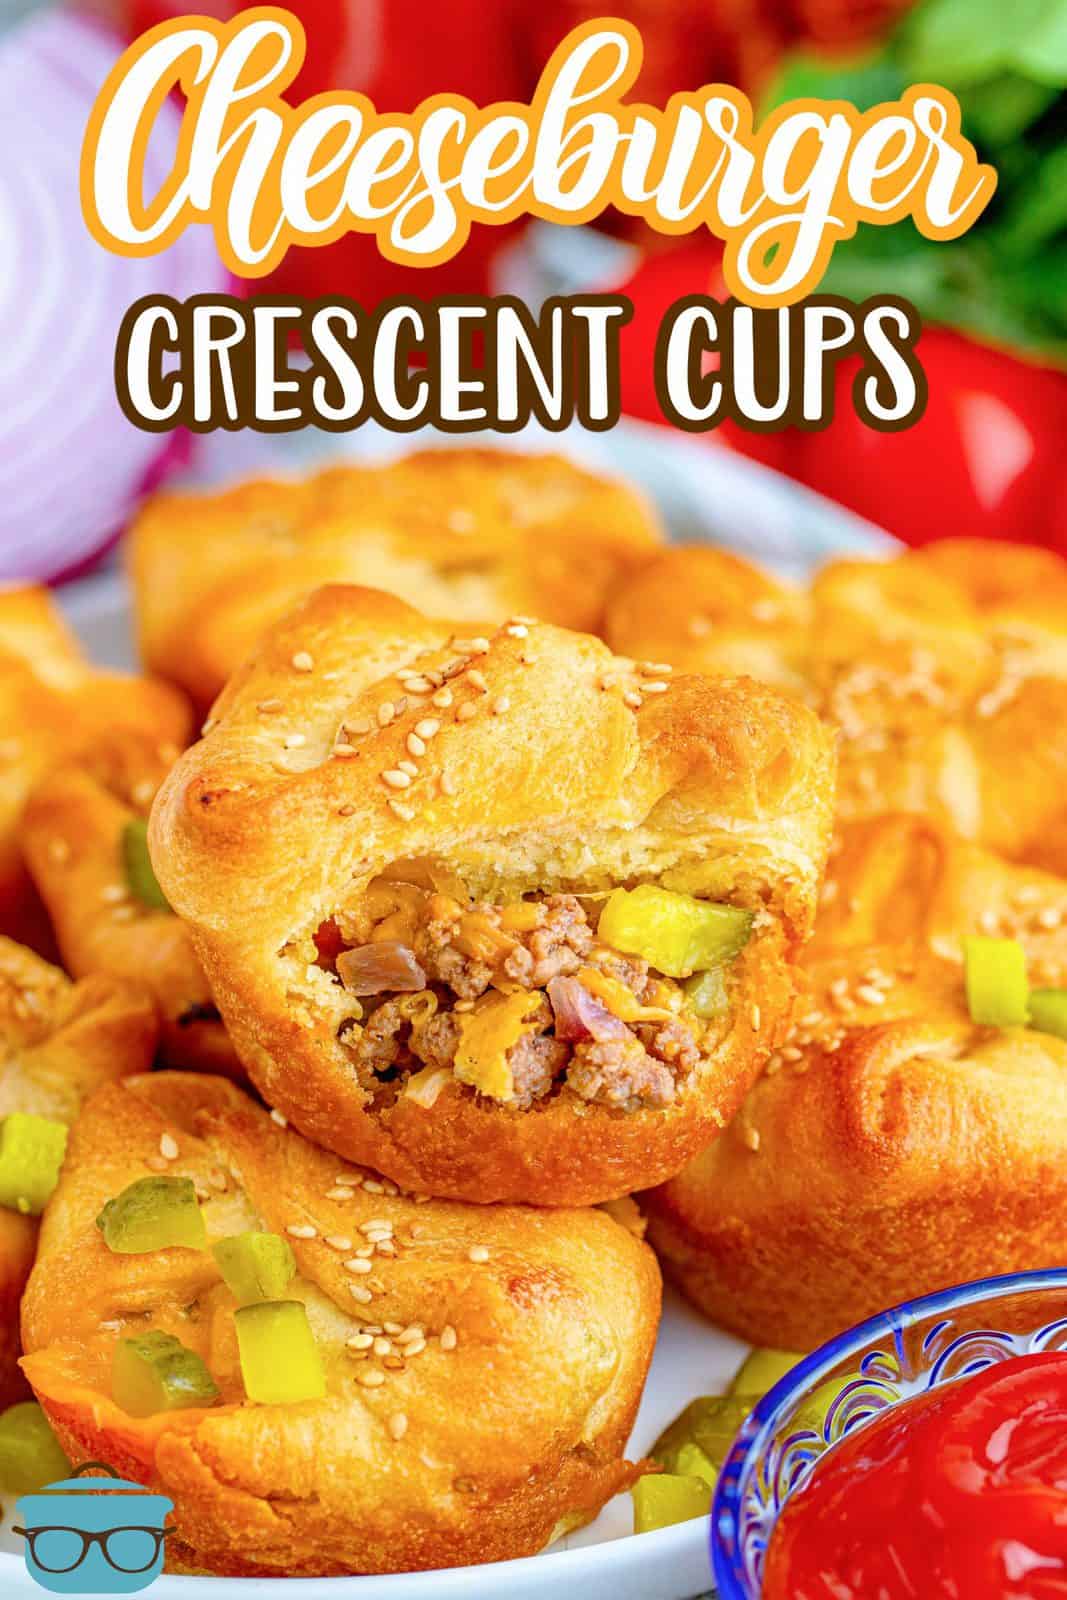 Image of stacked Easy Cheeseburger Crescent Cups on top of one another on a round white plate.